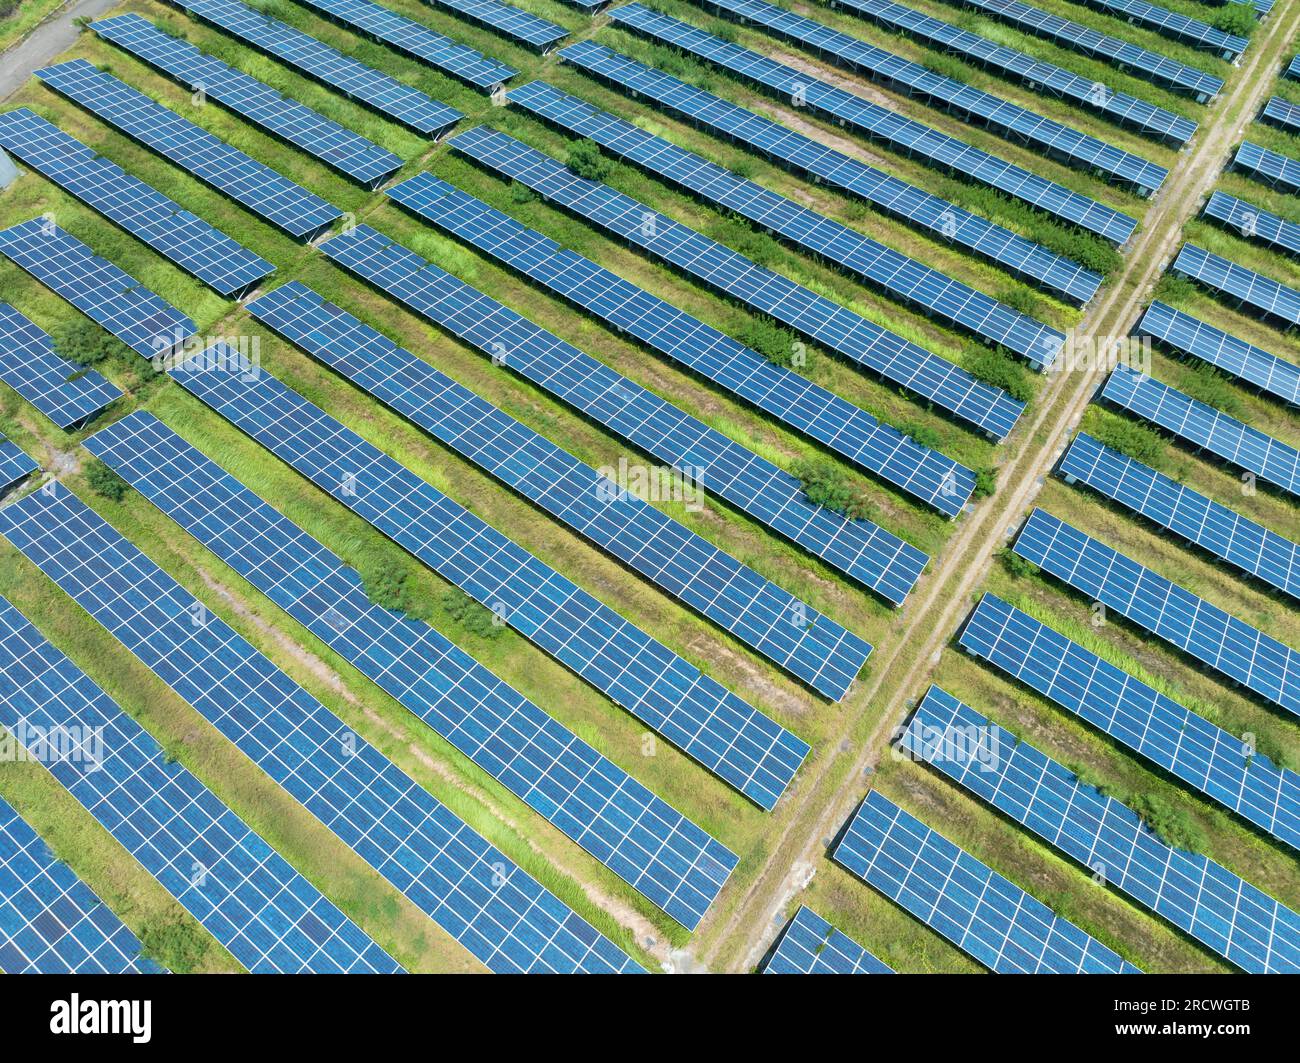 Aerial view of Solar panels, solar farms Stock Photo